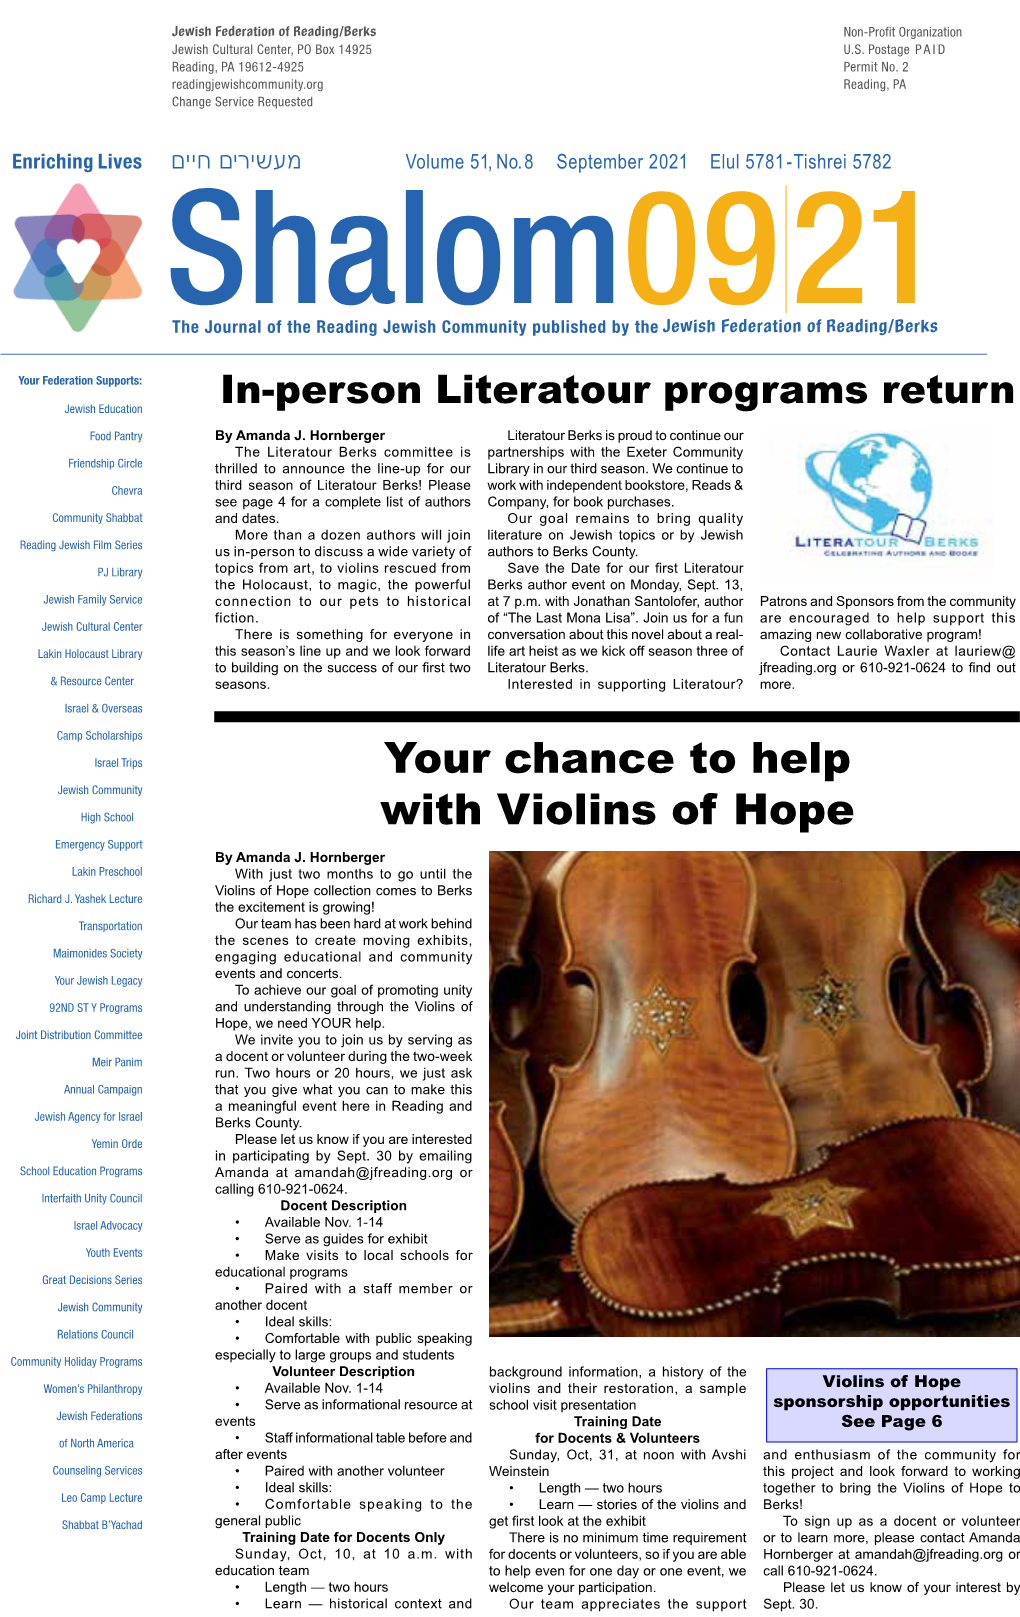 Your Chance to Help with Violins of Hope